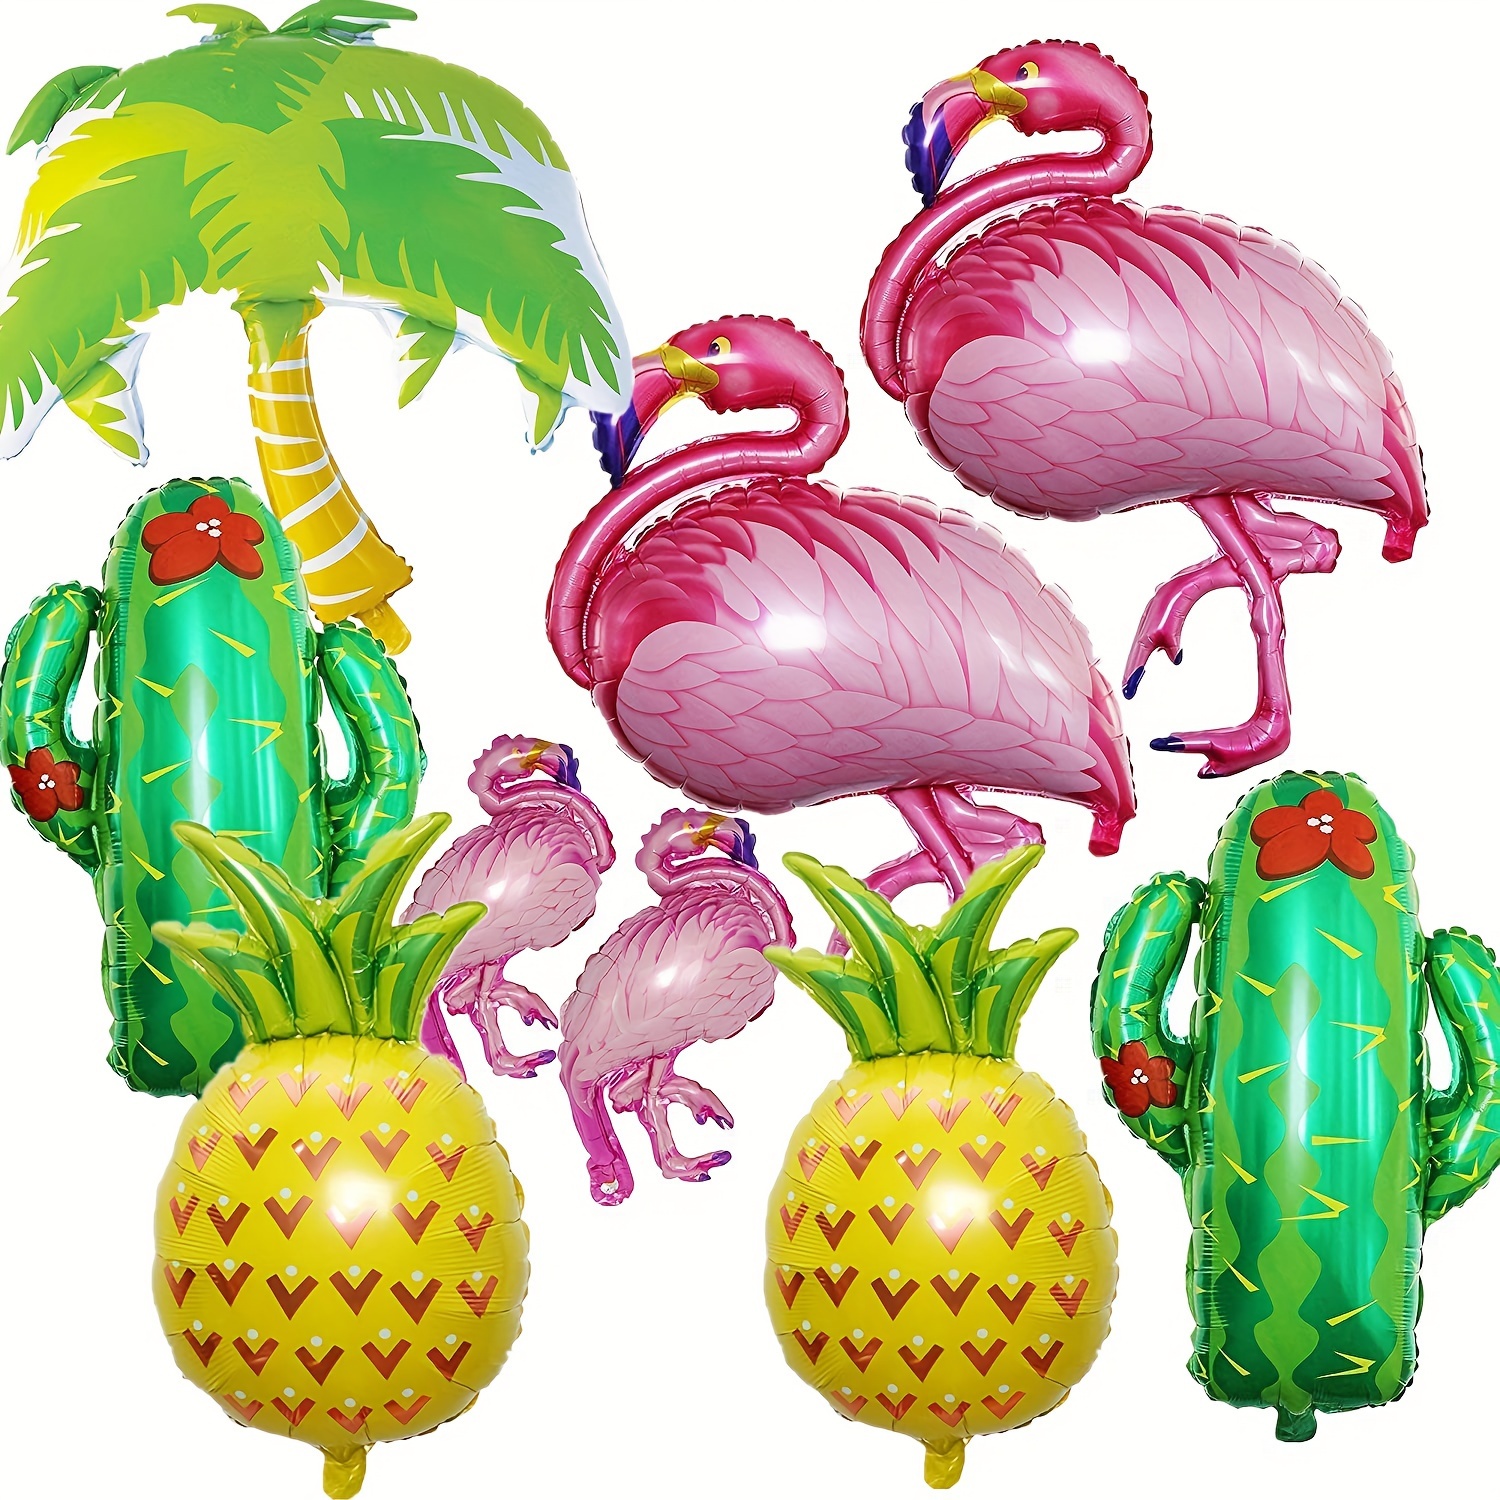 

9pcs Large Flamingo, Palm Tree, Pineapple Aluminum Foil Balloons Set - Self Sealing, Reusable - Perfect For Tropical Luau, Summer Beach, Birthday Parties - For Ages 14+ - No Electricity Required